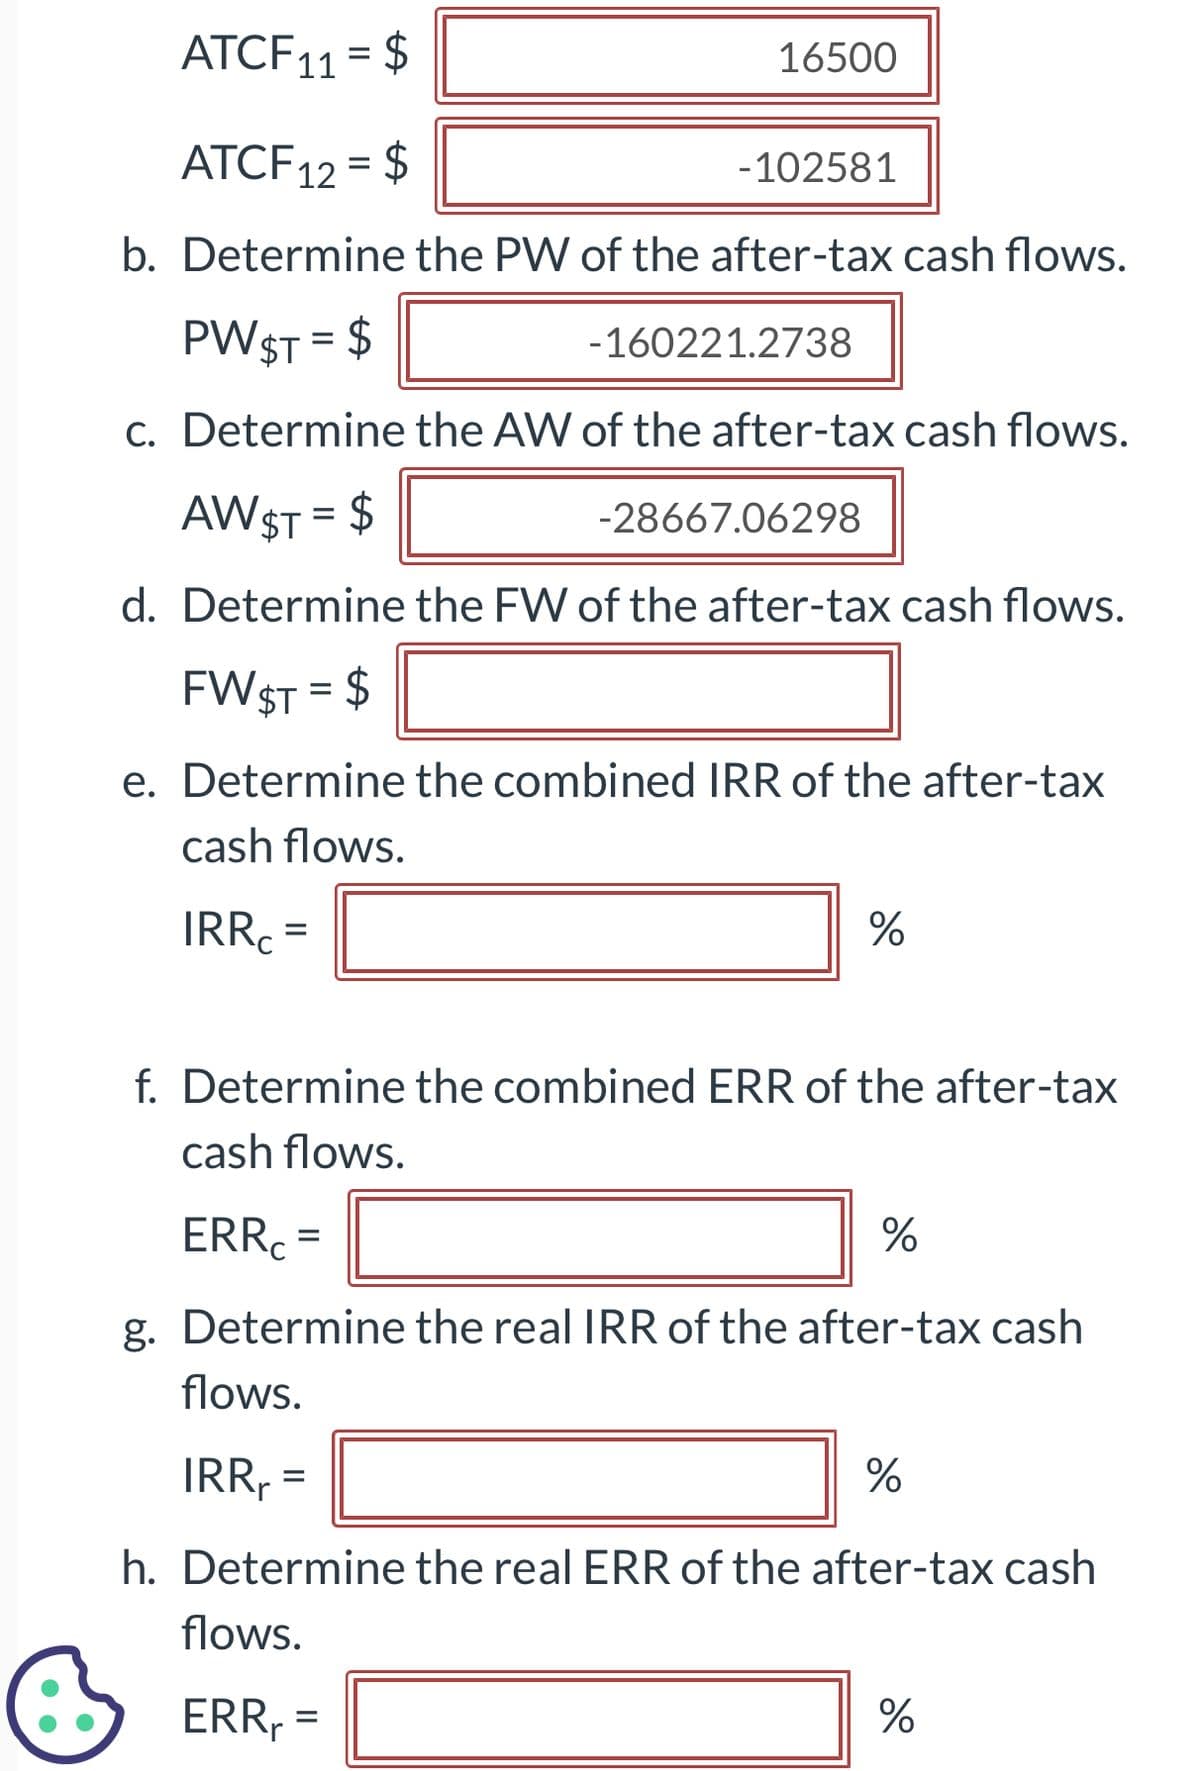 ATCF11 = $
ATCF 12 = $
-102581
b. Determine the PW of the after-tax cash flows.
PWST = $
16500
c. Determine the AW of the after-tax cash flows.
AW $T = $
=
-160221.2738
d. Determine the FW of the after-tax cash flows.
FW $T = $
e. Determine the combined IRR of the after-tax
cash flows.
IRRC=
-28667.06298
=
%
f. Determine the combined ERR of the after-tax
cash flows.
ERRC
%
g. Determine the real IRR of the after-tax cash
flows.
IRR₁ =
%
h. Determine the real ERR of the after-tax cash
flows.
ERRr
%